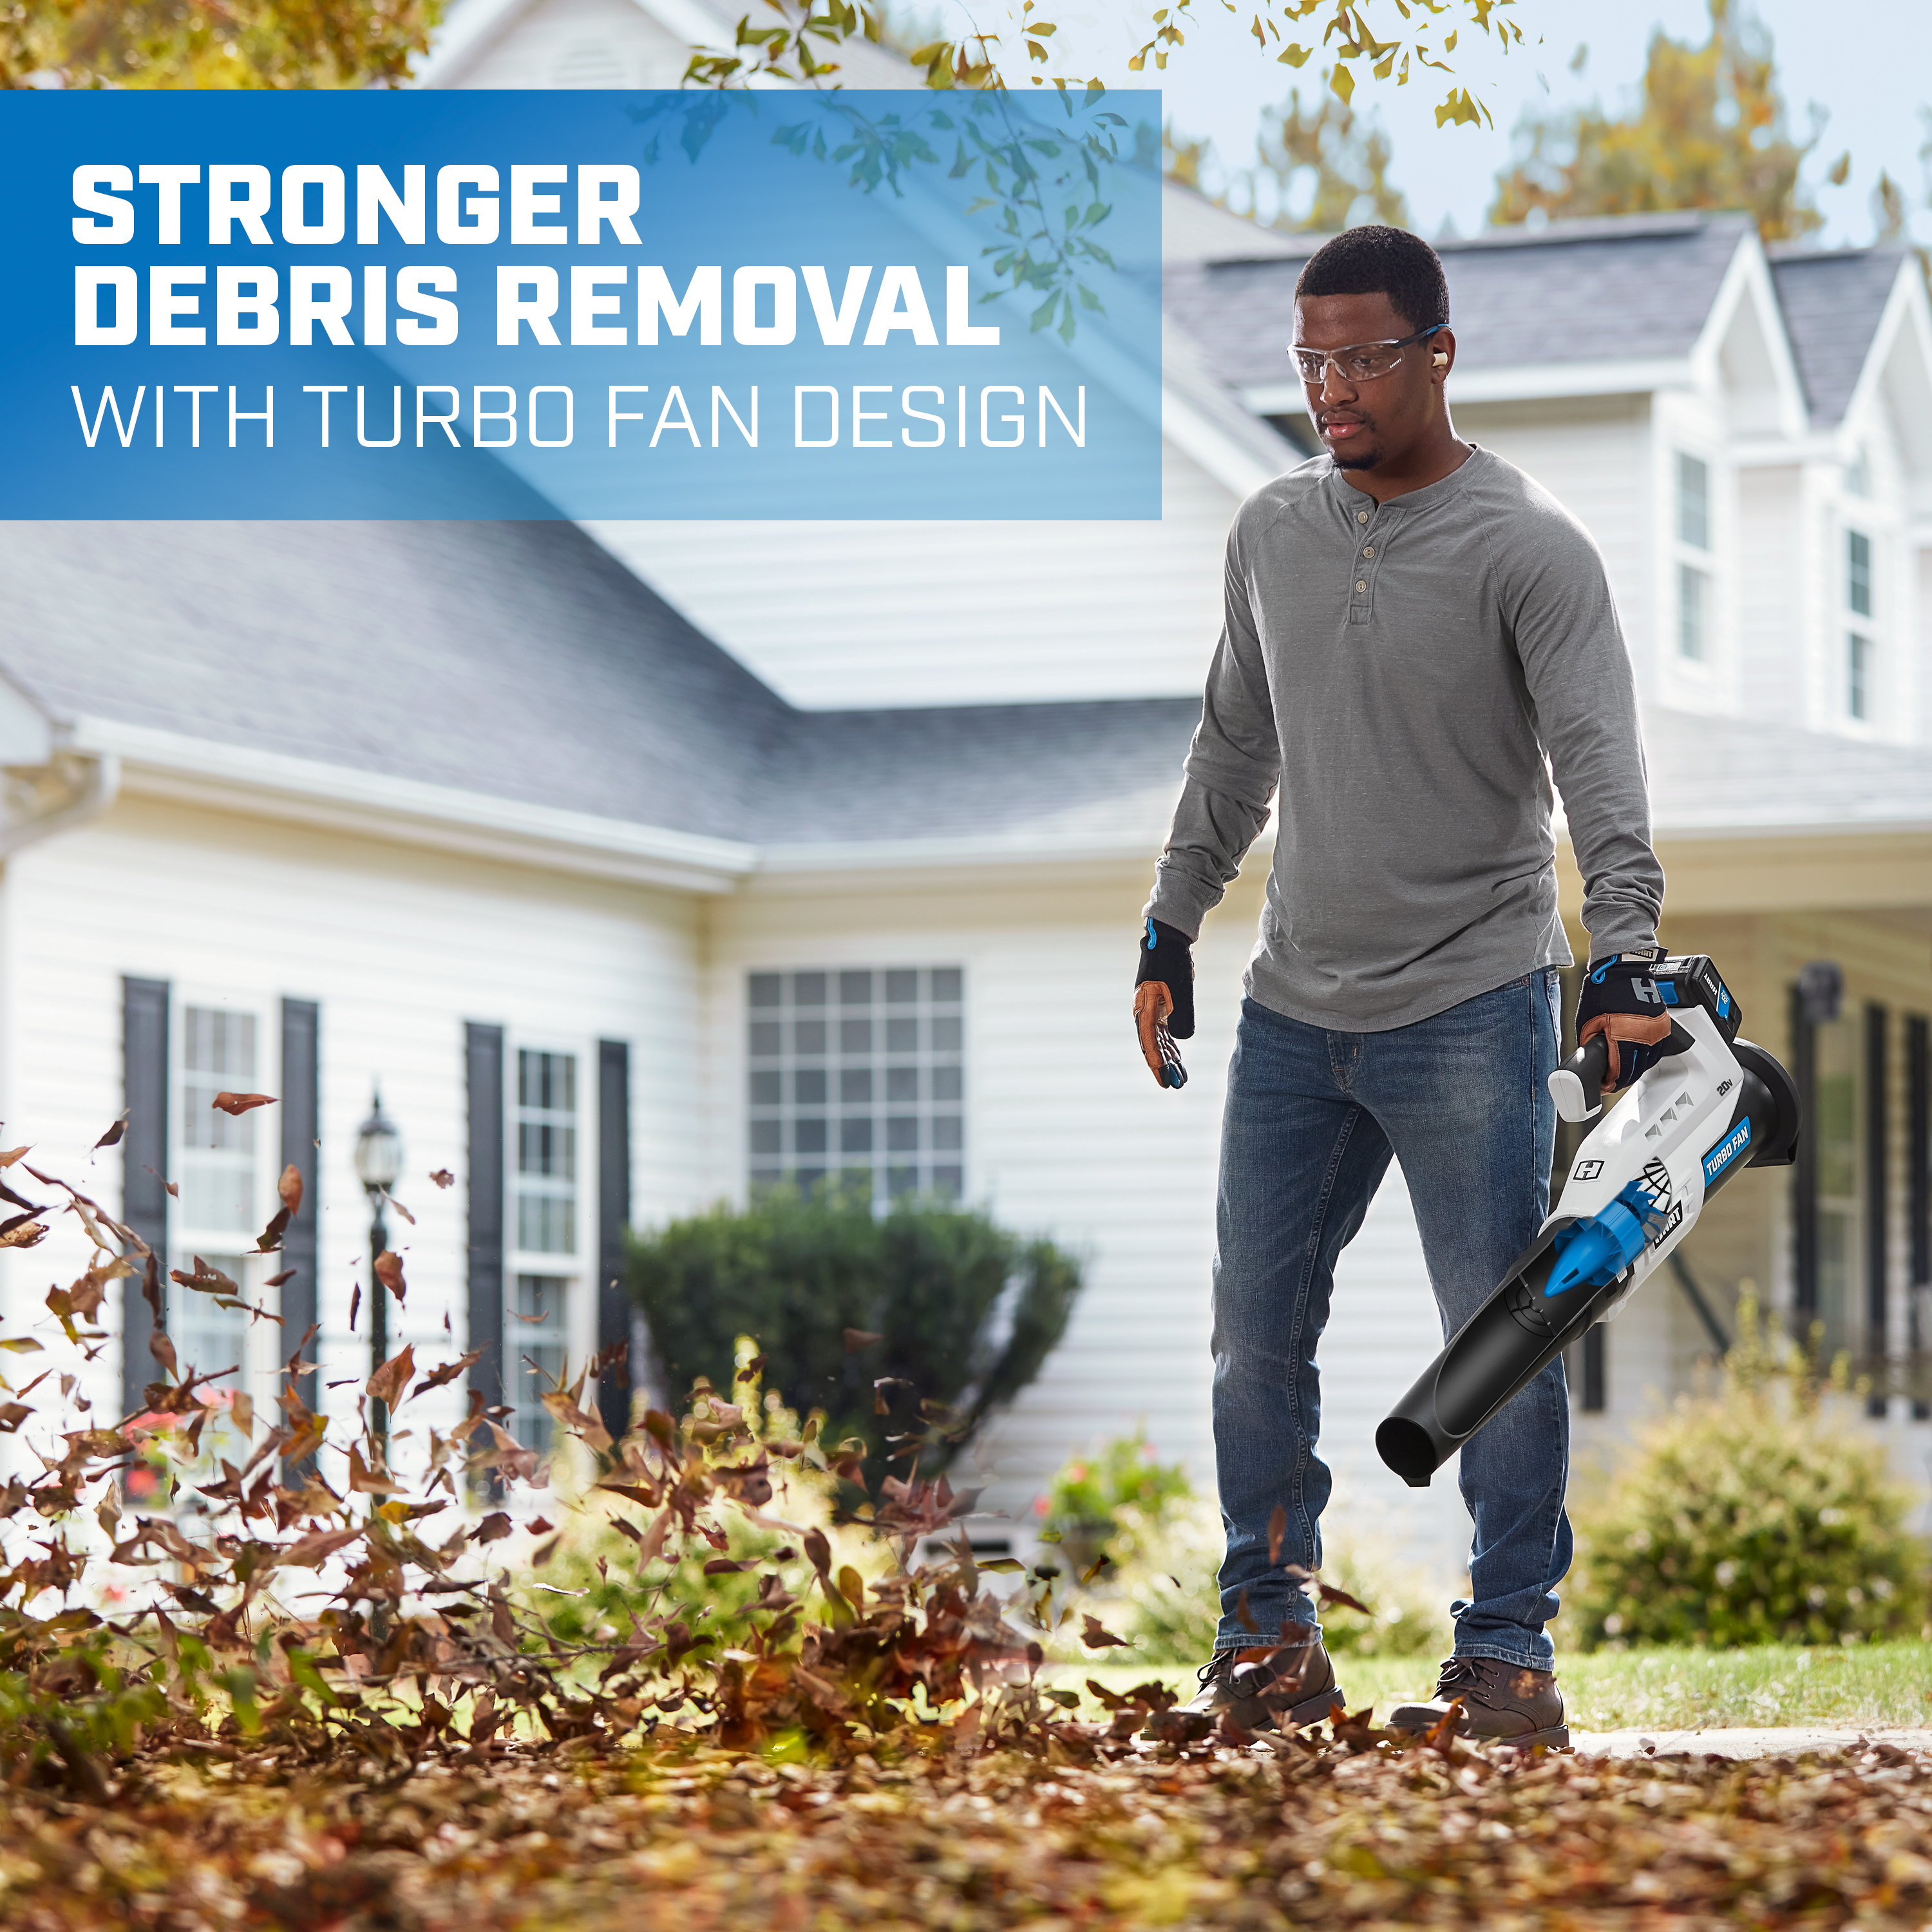 Stronger Debris Removal with Turbo Fan Design